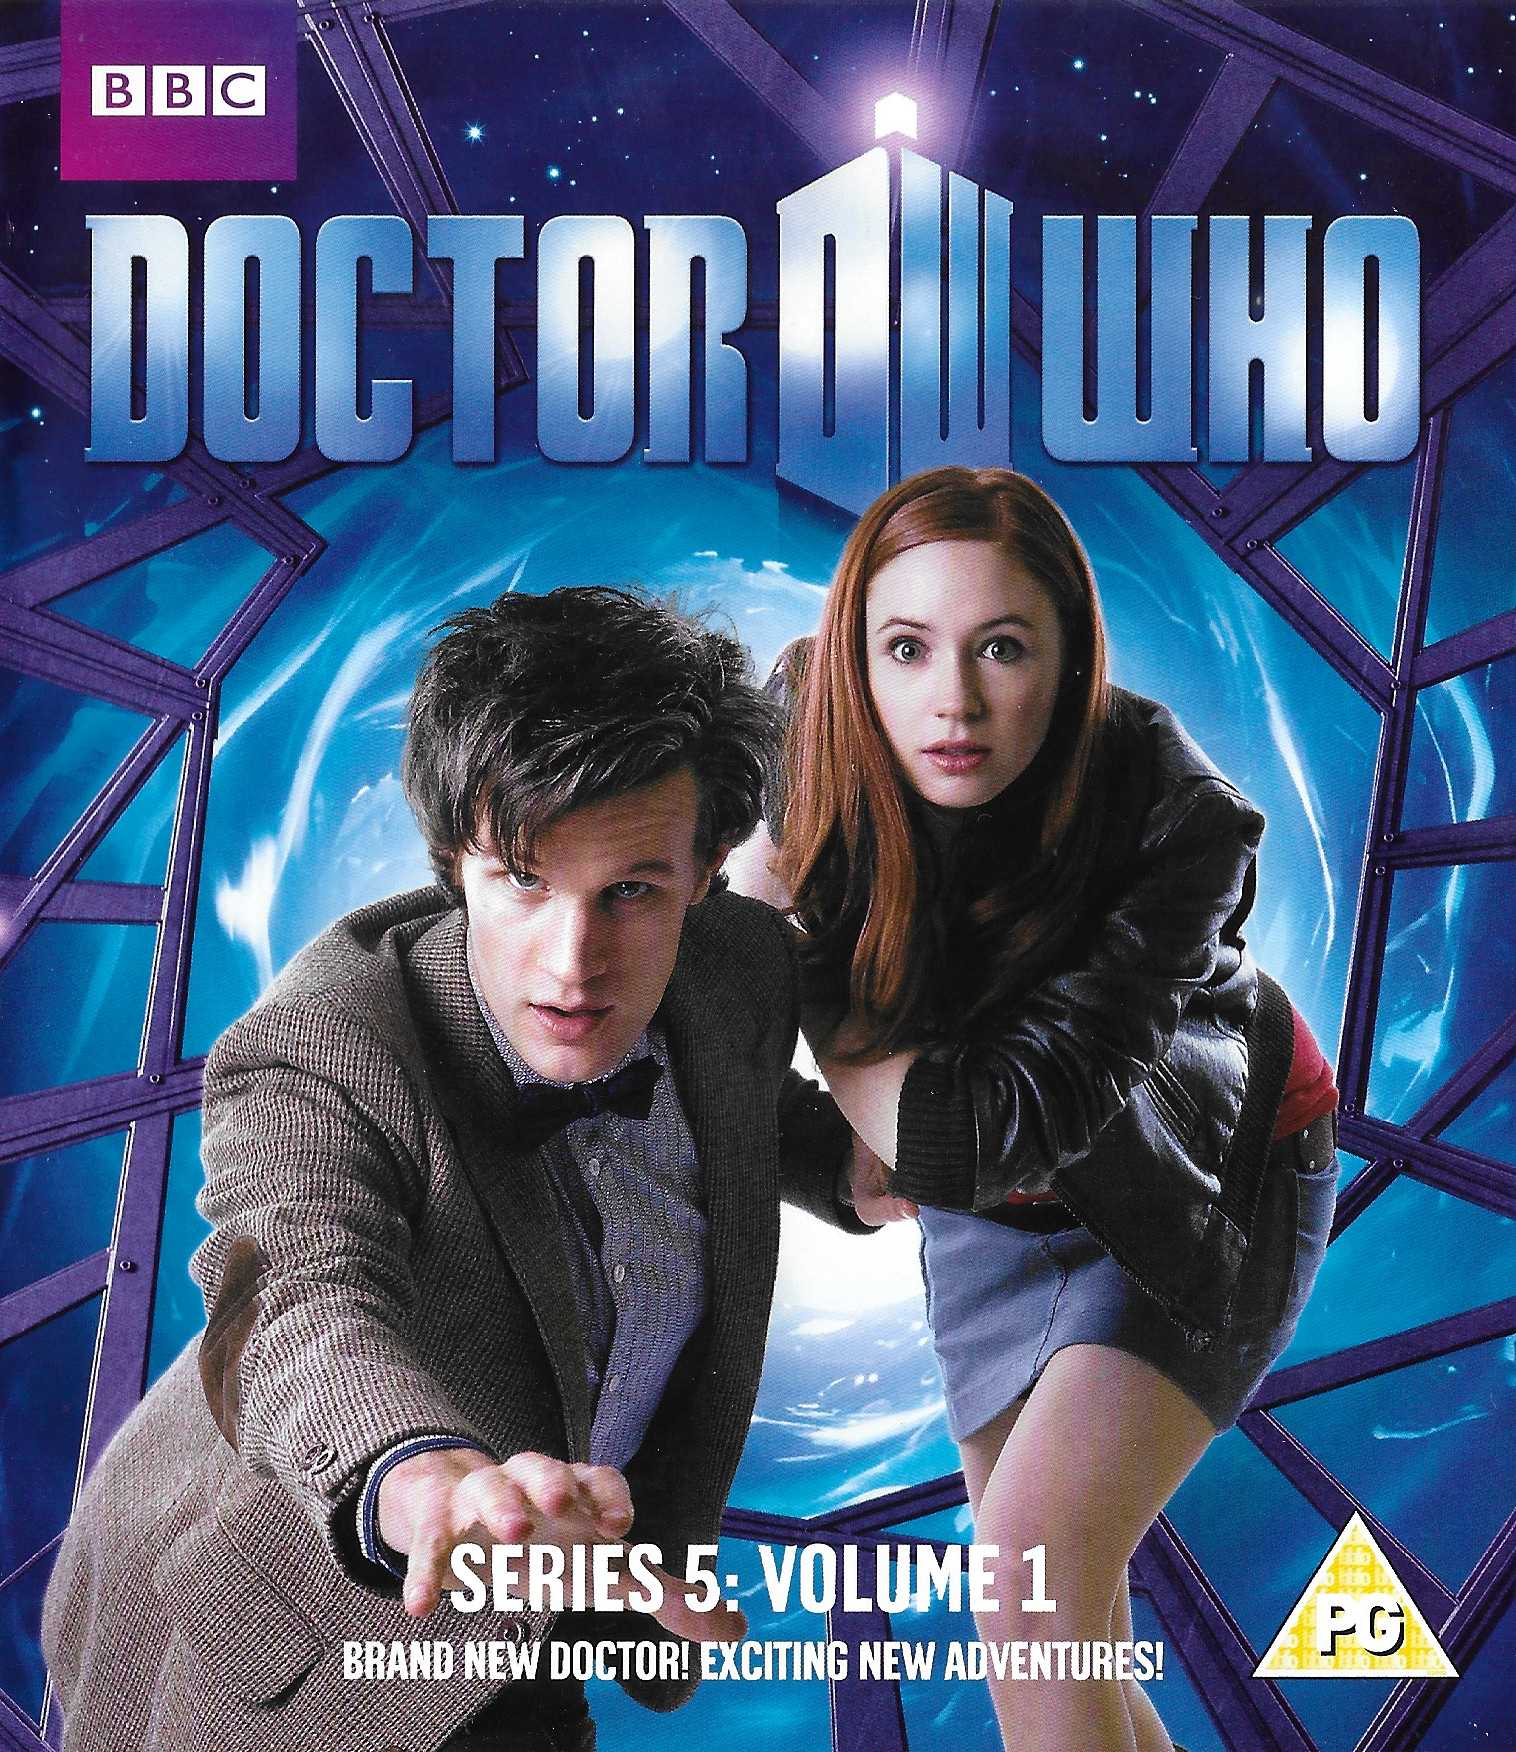 Picture of BBCBD 0082 Doctor Who - Series 5, volume 1 by artist Steven Moffat / Mark Gatiss from the BBC records and Tapes library